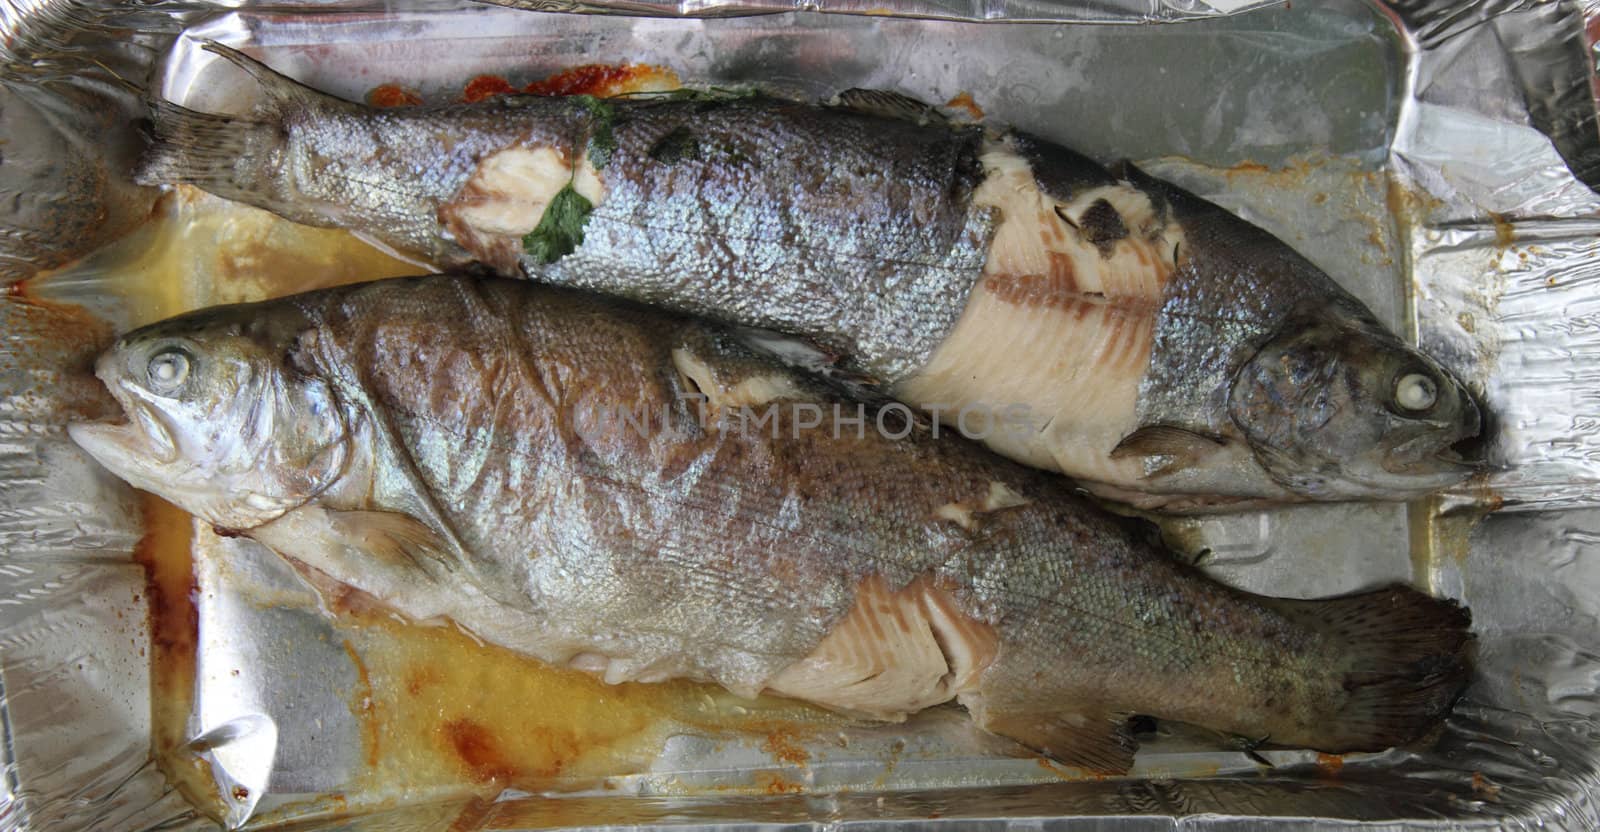 baked trout fish as very nice food background